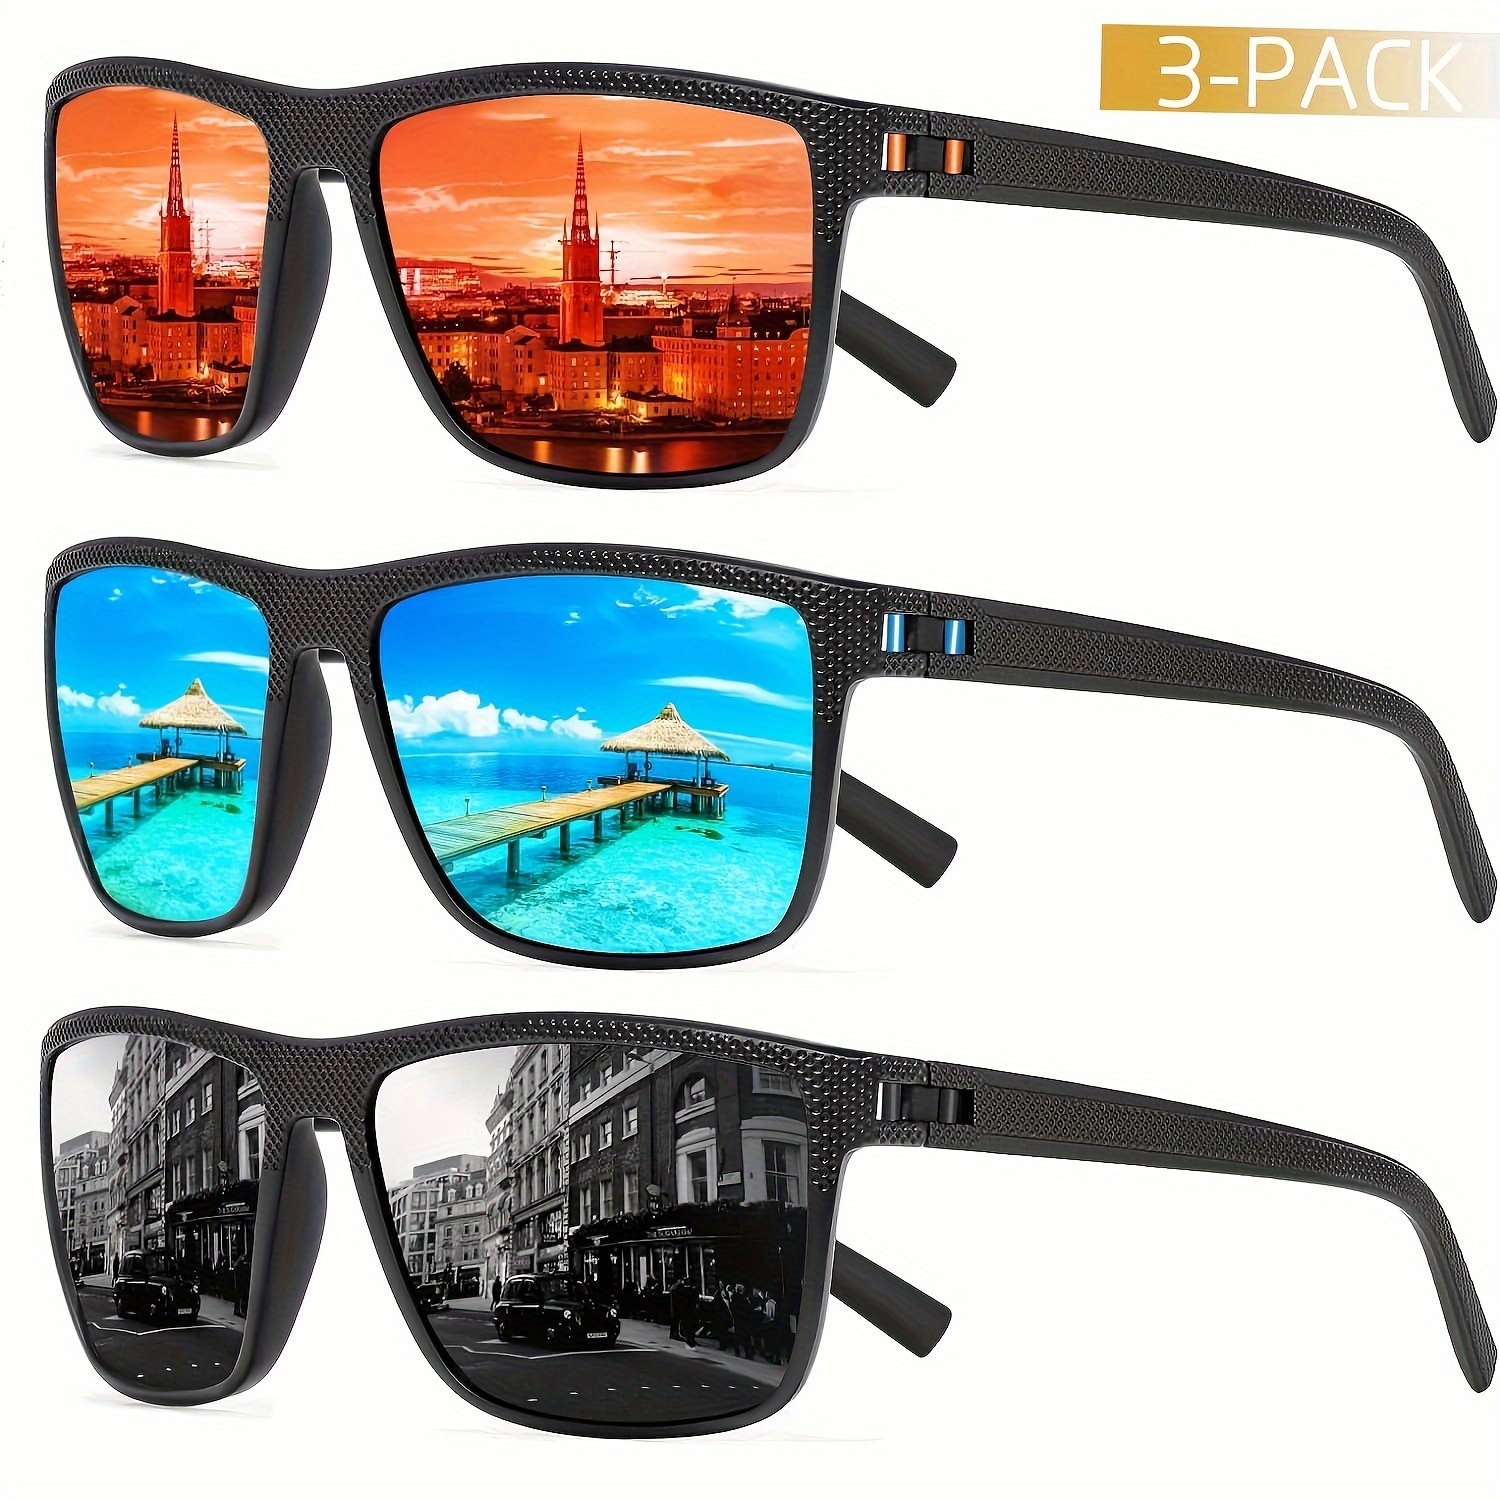 

3pcs Square Polarized Fashion Glasses For Men, Lightweight Glasses With For Driving Fishing Golf Glasses.